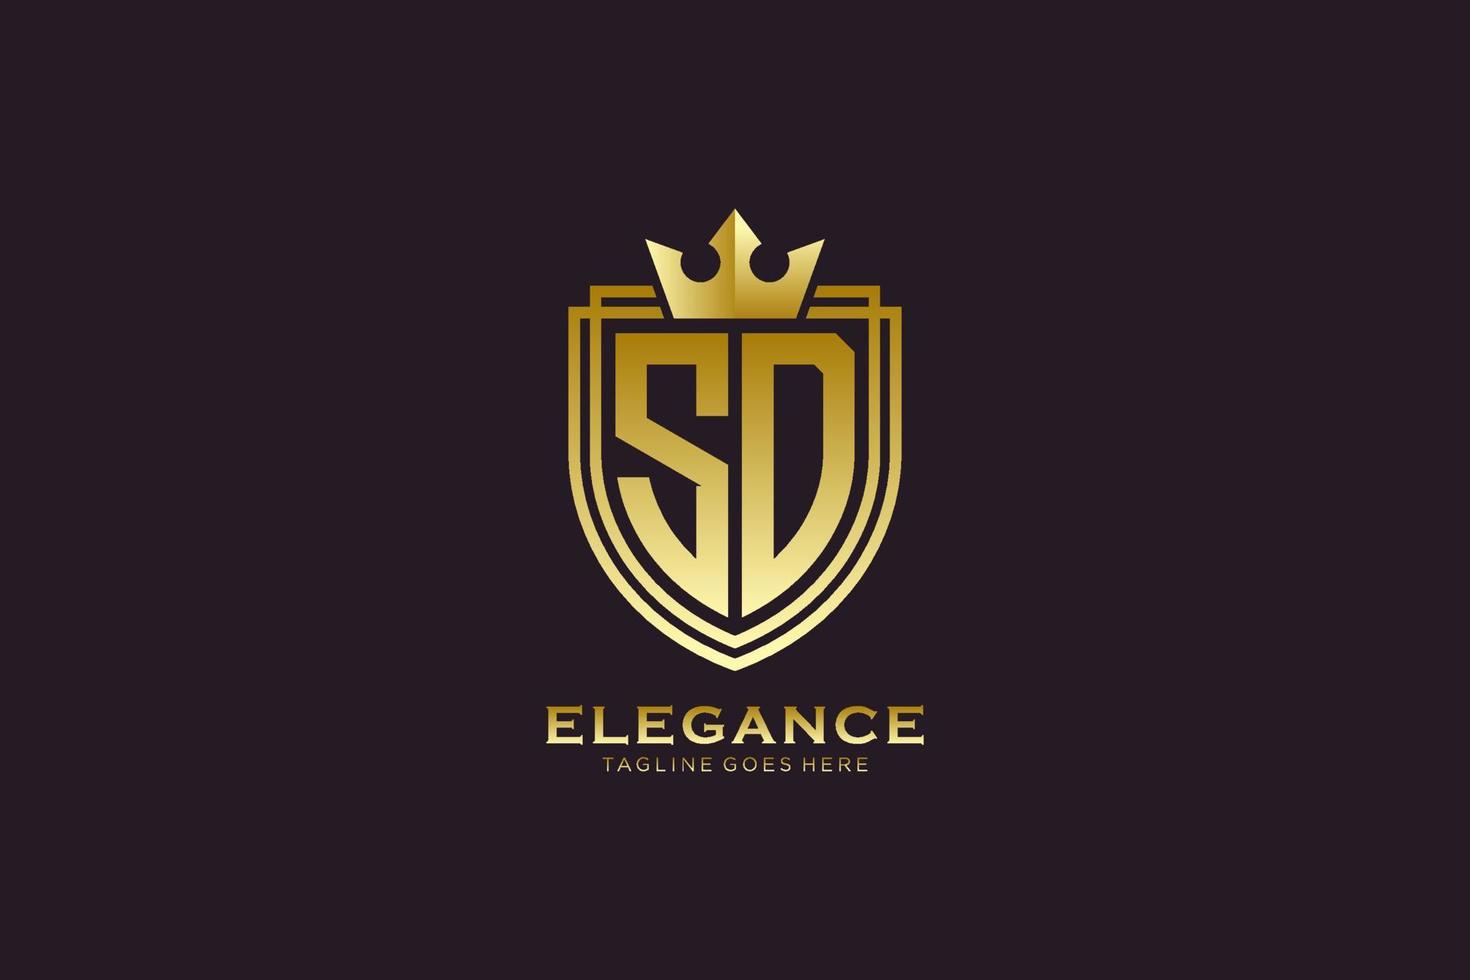 initial SD elegant luxury monogram logo or badge template with scrolls and royal crown - perfect for luxurious branding projects vector